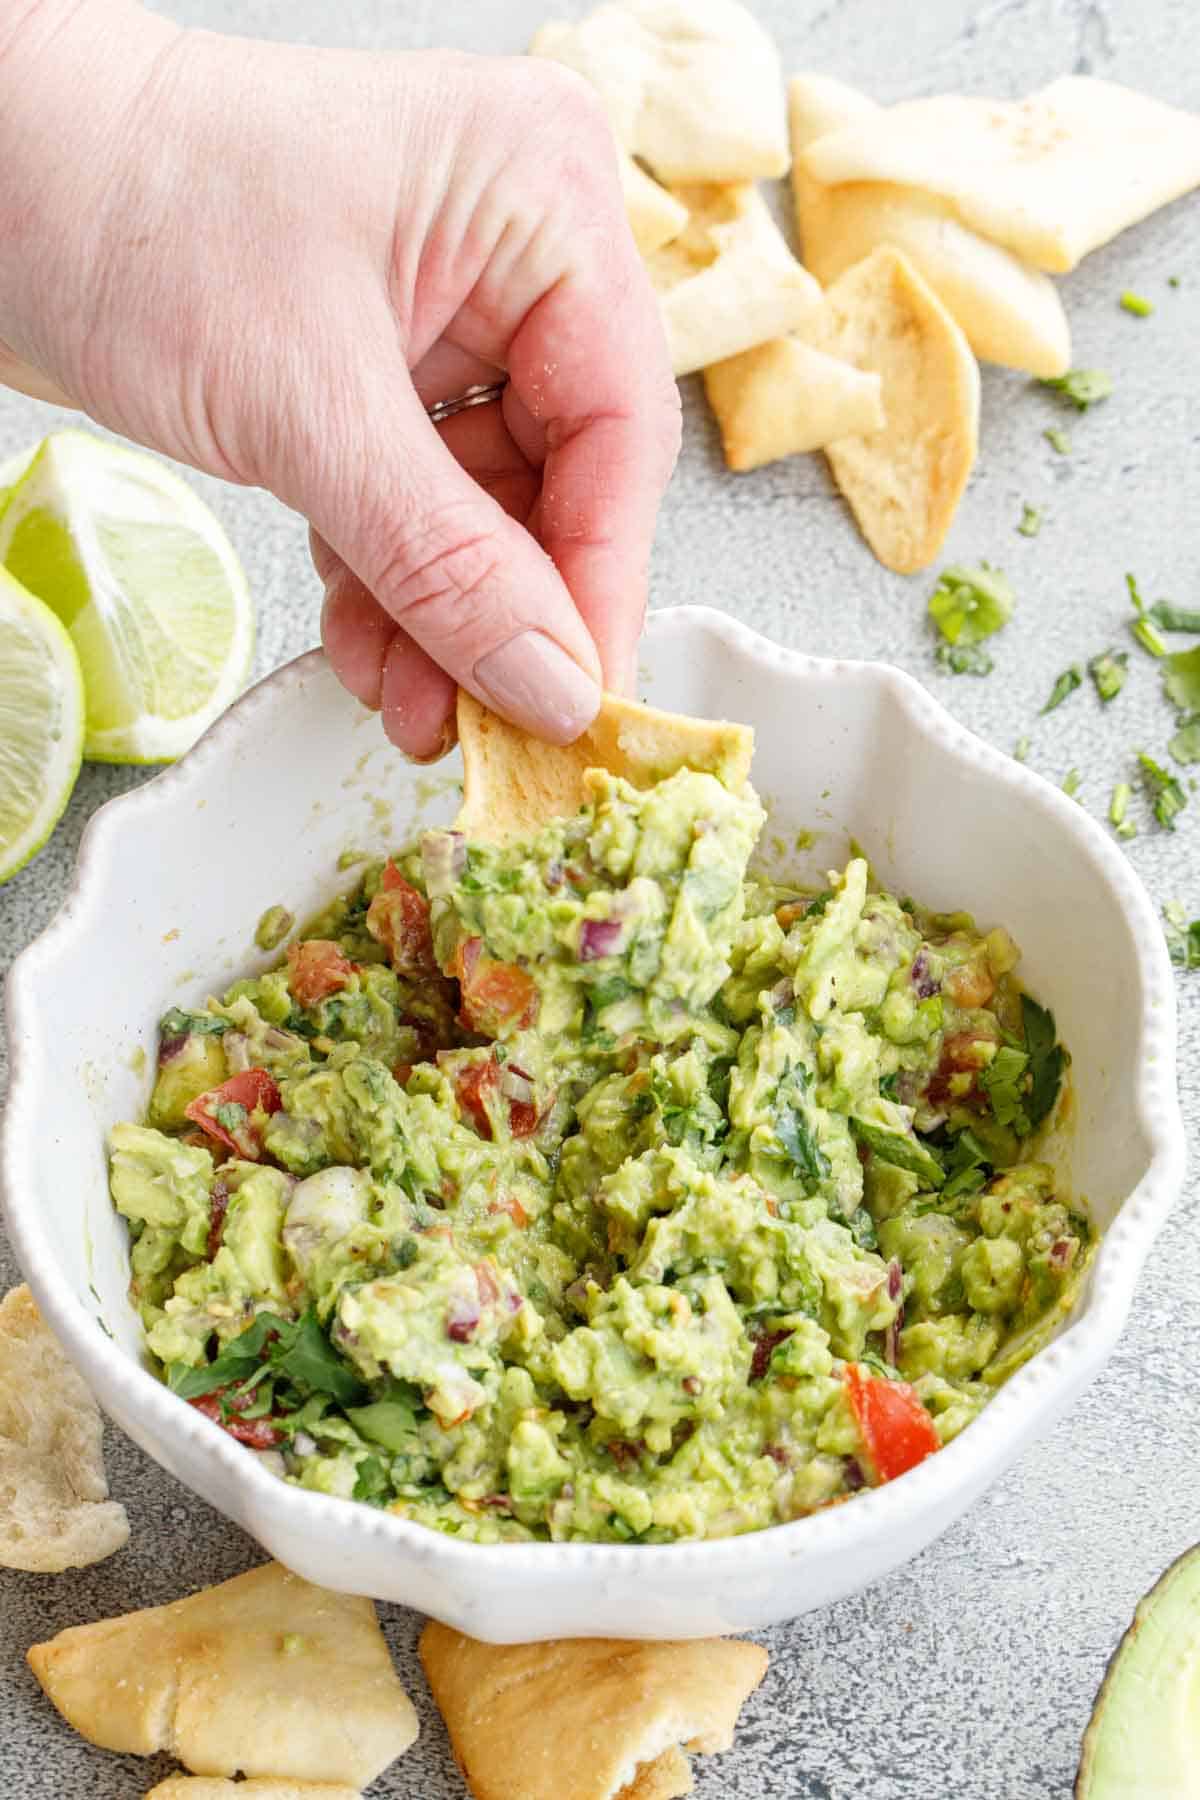 Easy guacamole recipe made in minutes! Guacamole in a bowl with fresh limes.